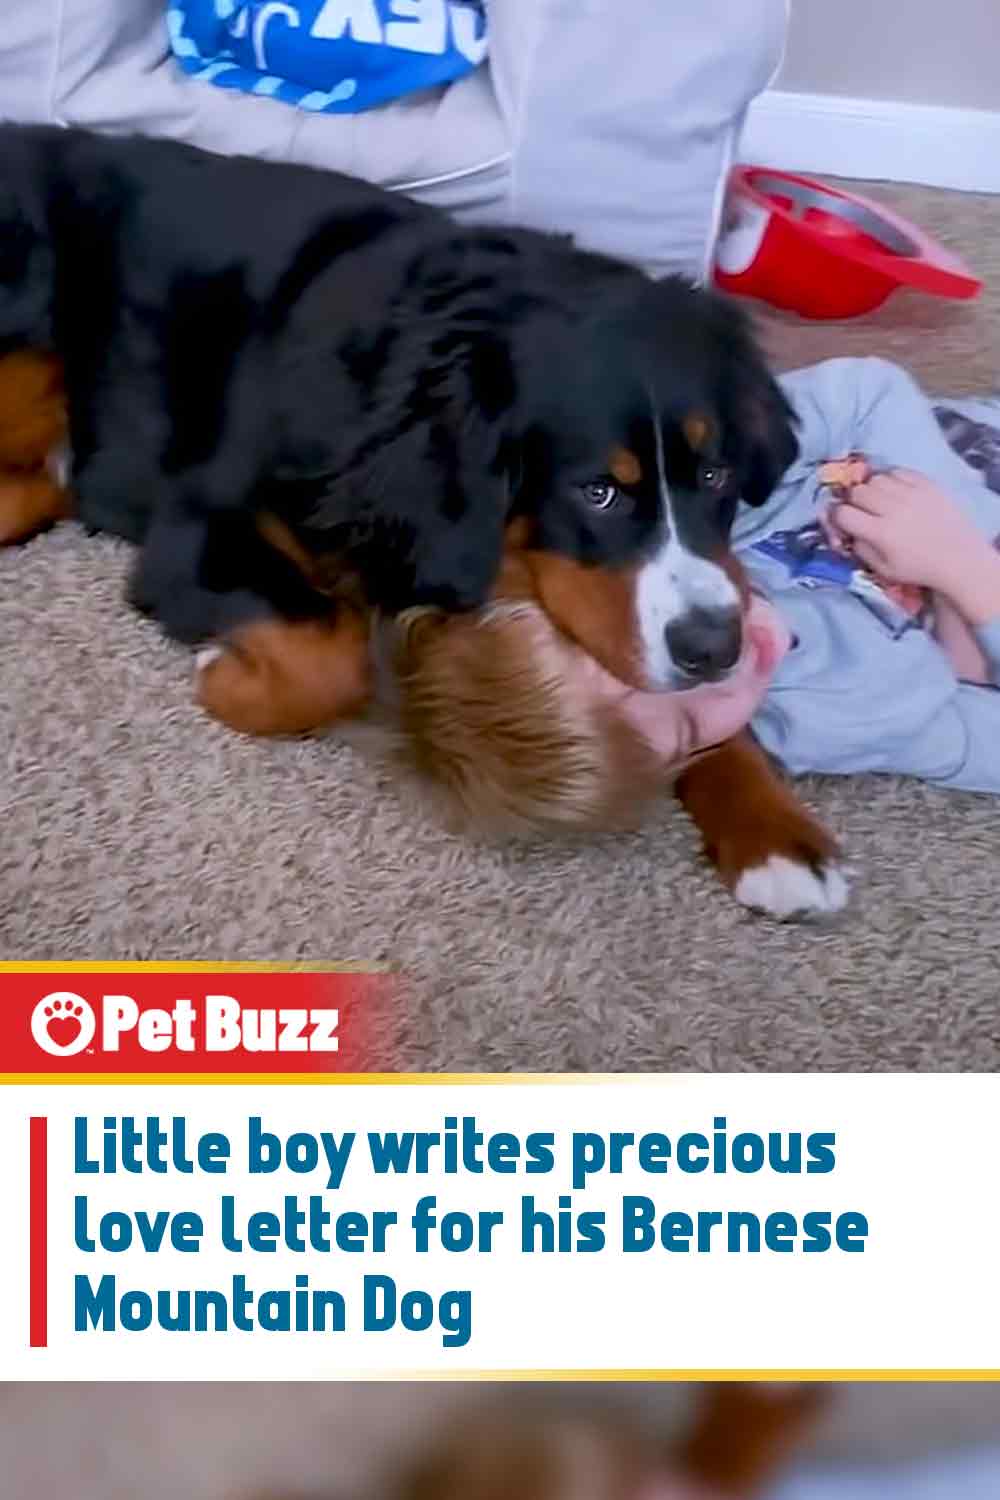 Little boy writes precious love letter for his Bernese Mountain Dog